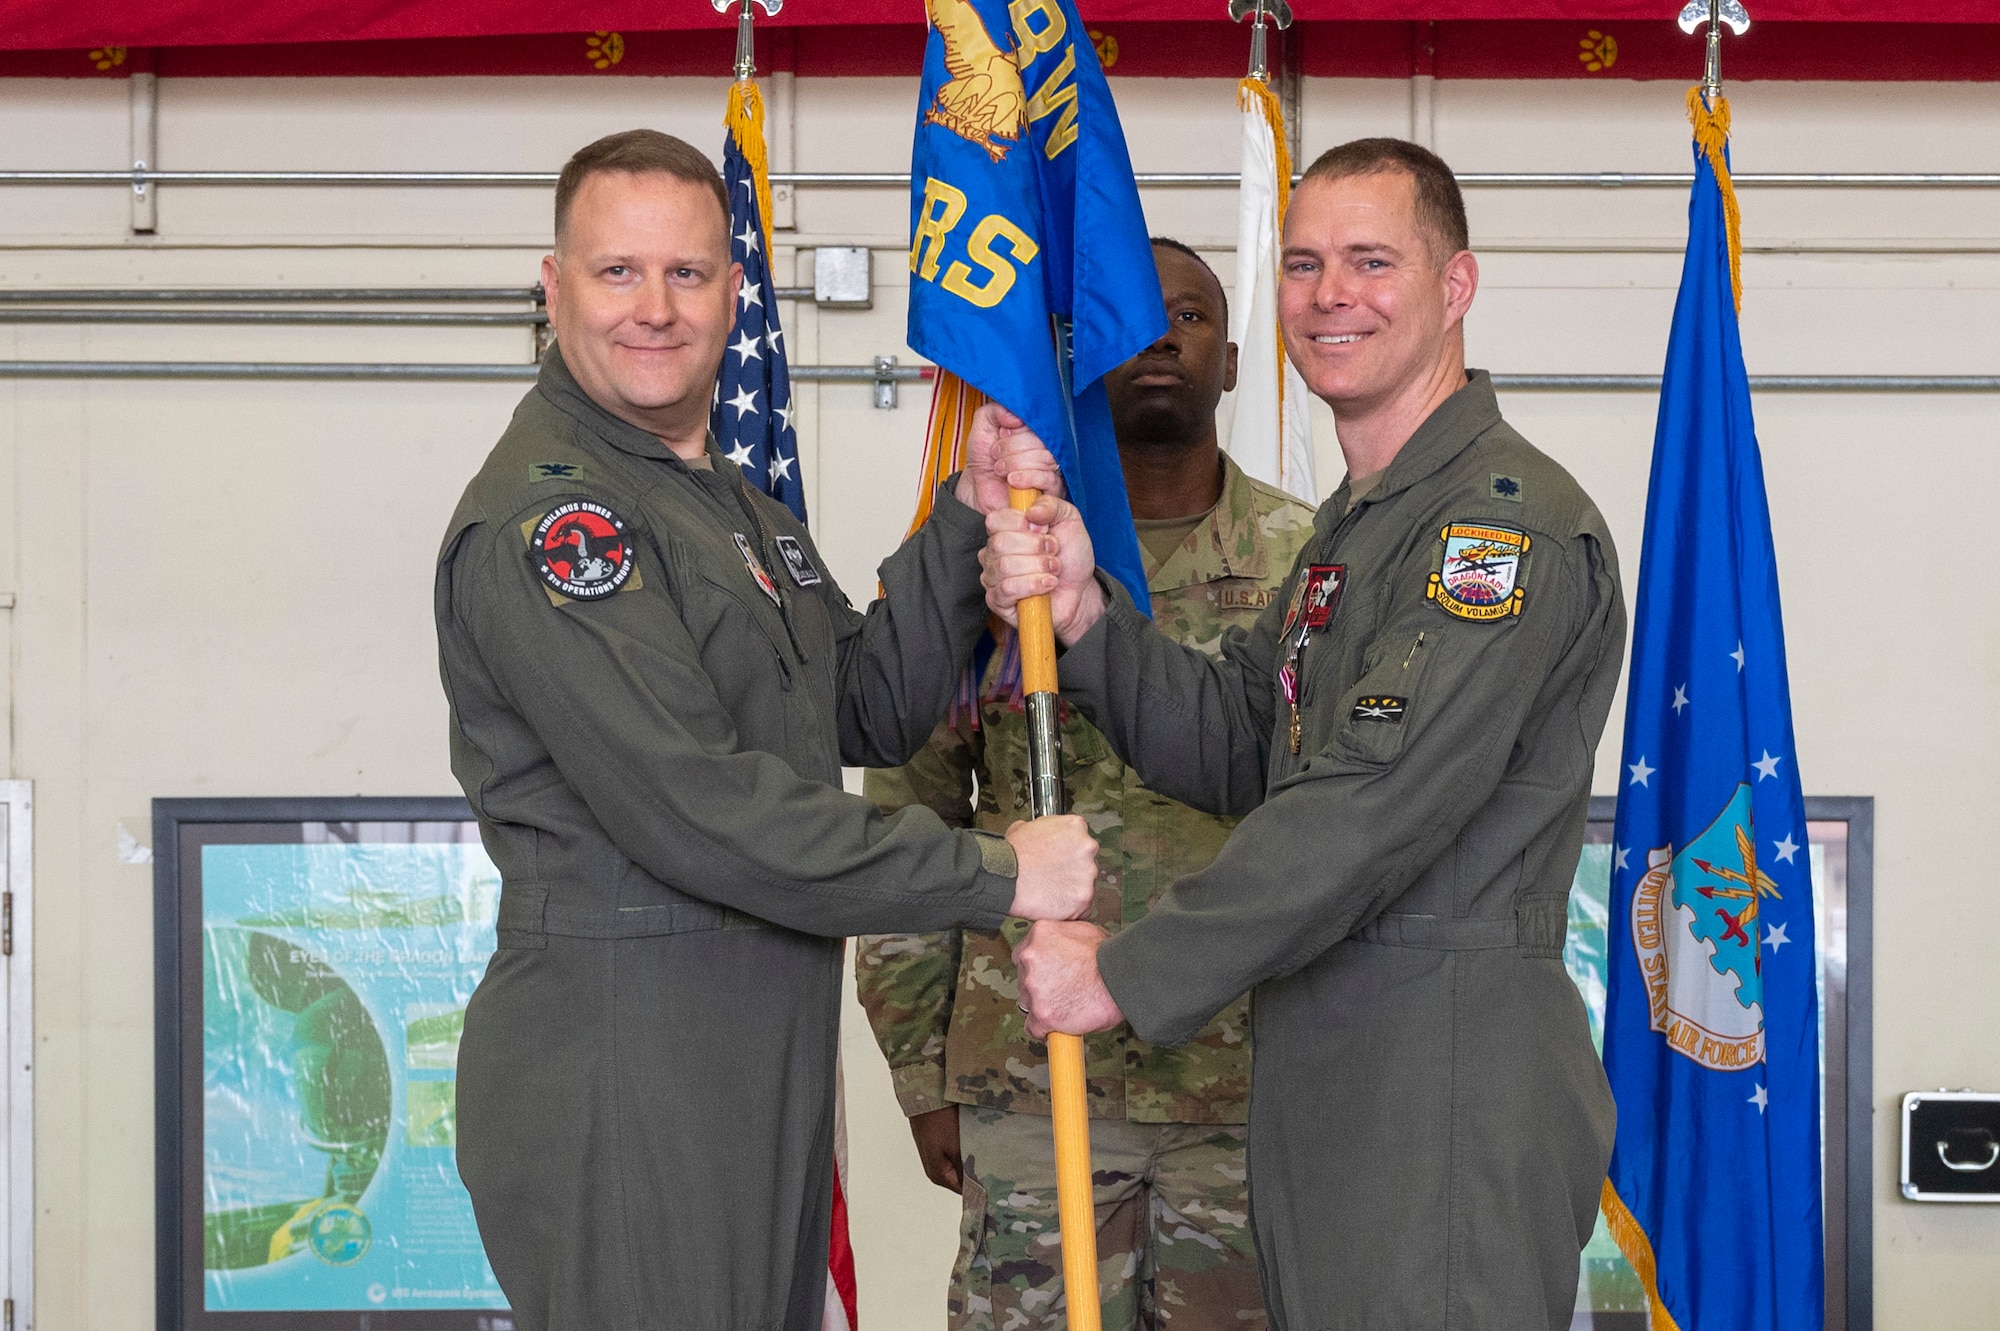 U.S. Air Force Lt. Col. Michael Opresko, 5th Reconnaissance Squadron commander, passes the guidon to Col. Jason Bialon, left, 9th Operations Group commander, at Osan Air Base, Republic of Korea, June 2, 2023. In a change of command ceremony, the guidon symbolizes the transfer of command and the authority and responsibility associated with it. (U.S. Air Force photo by Airman 1st Class Aaron Edwards)